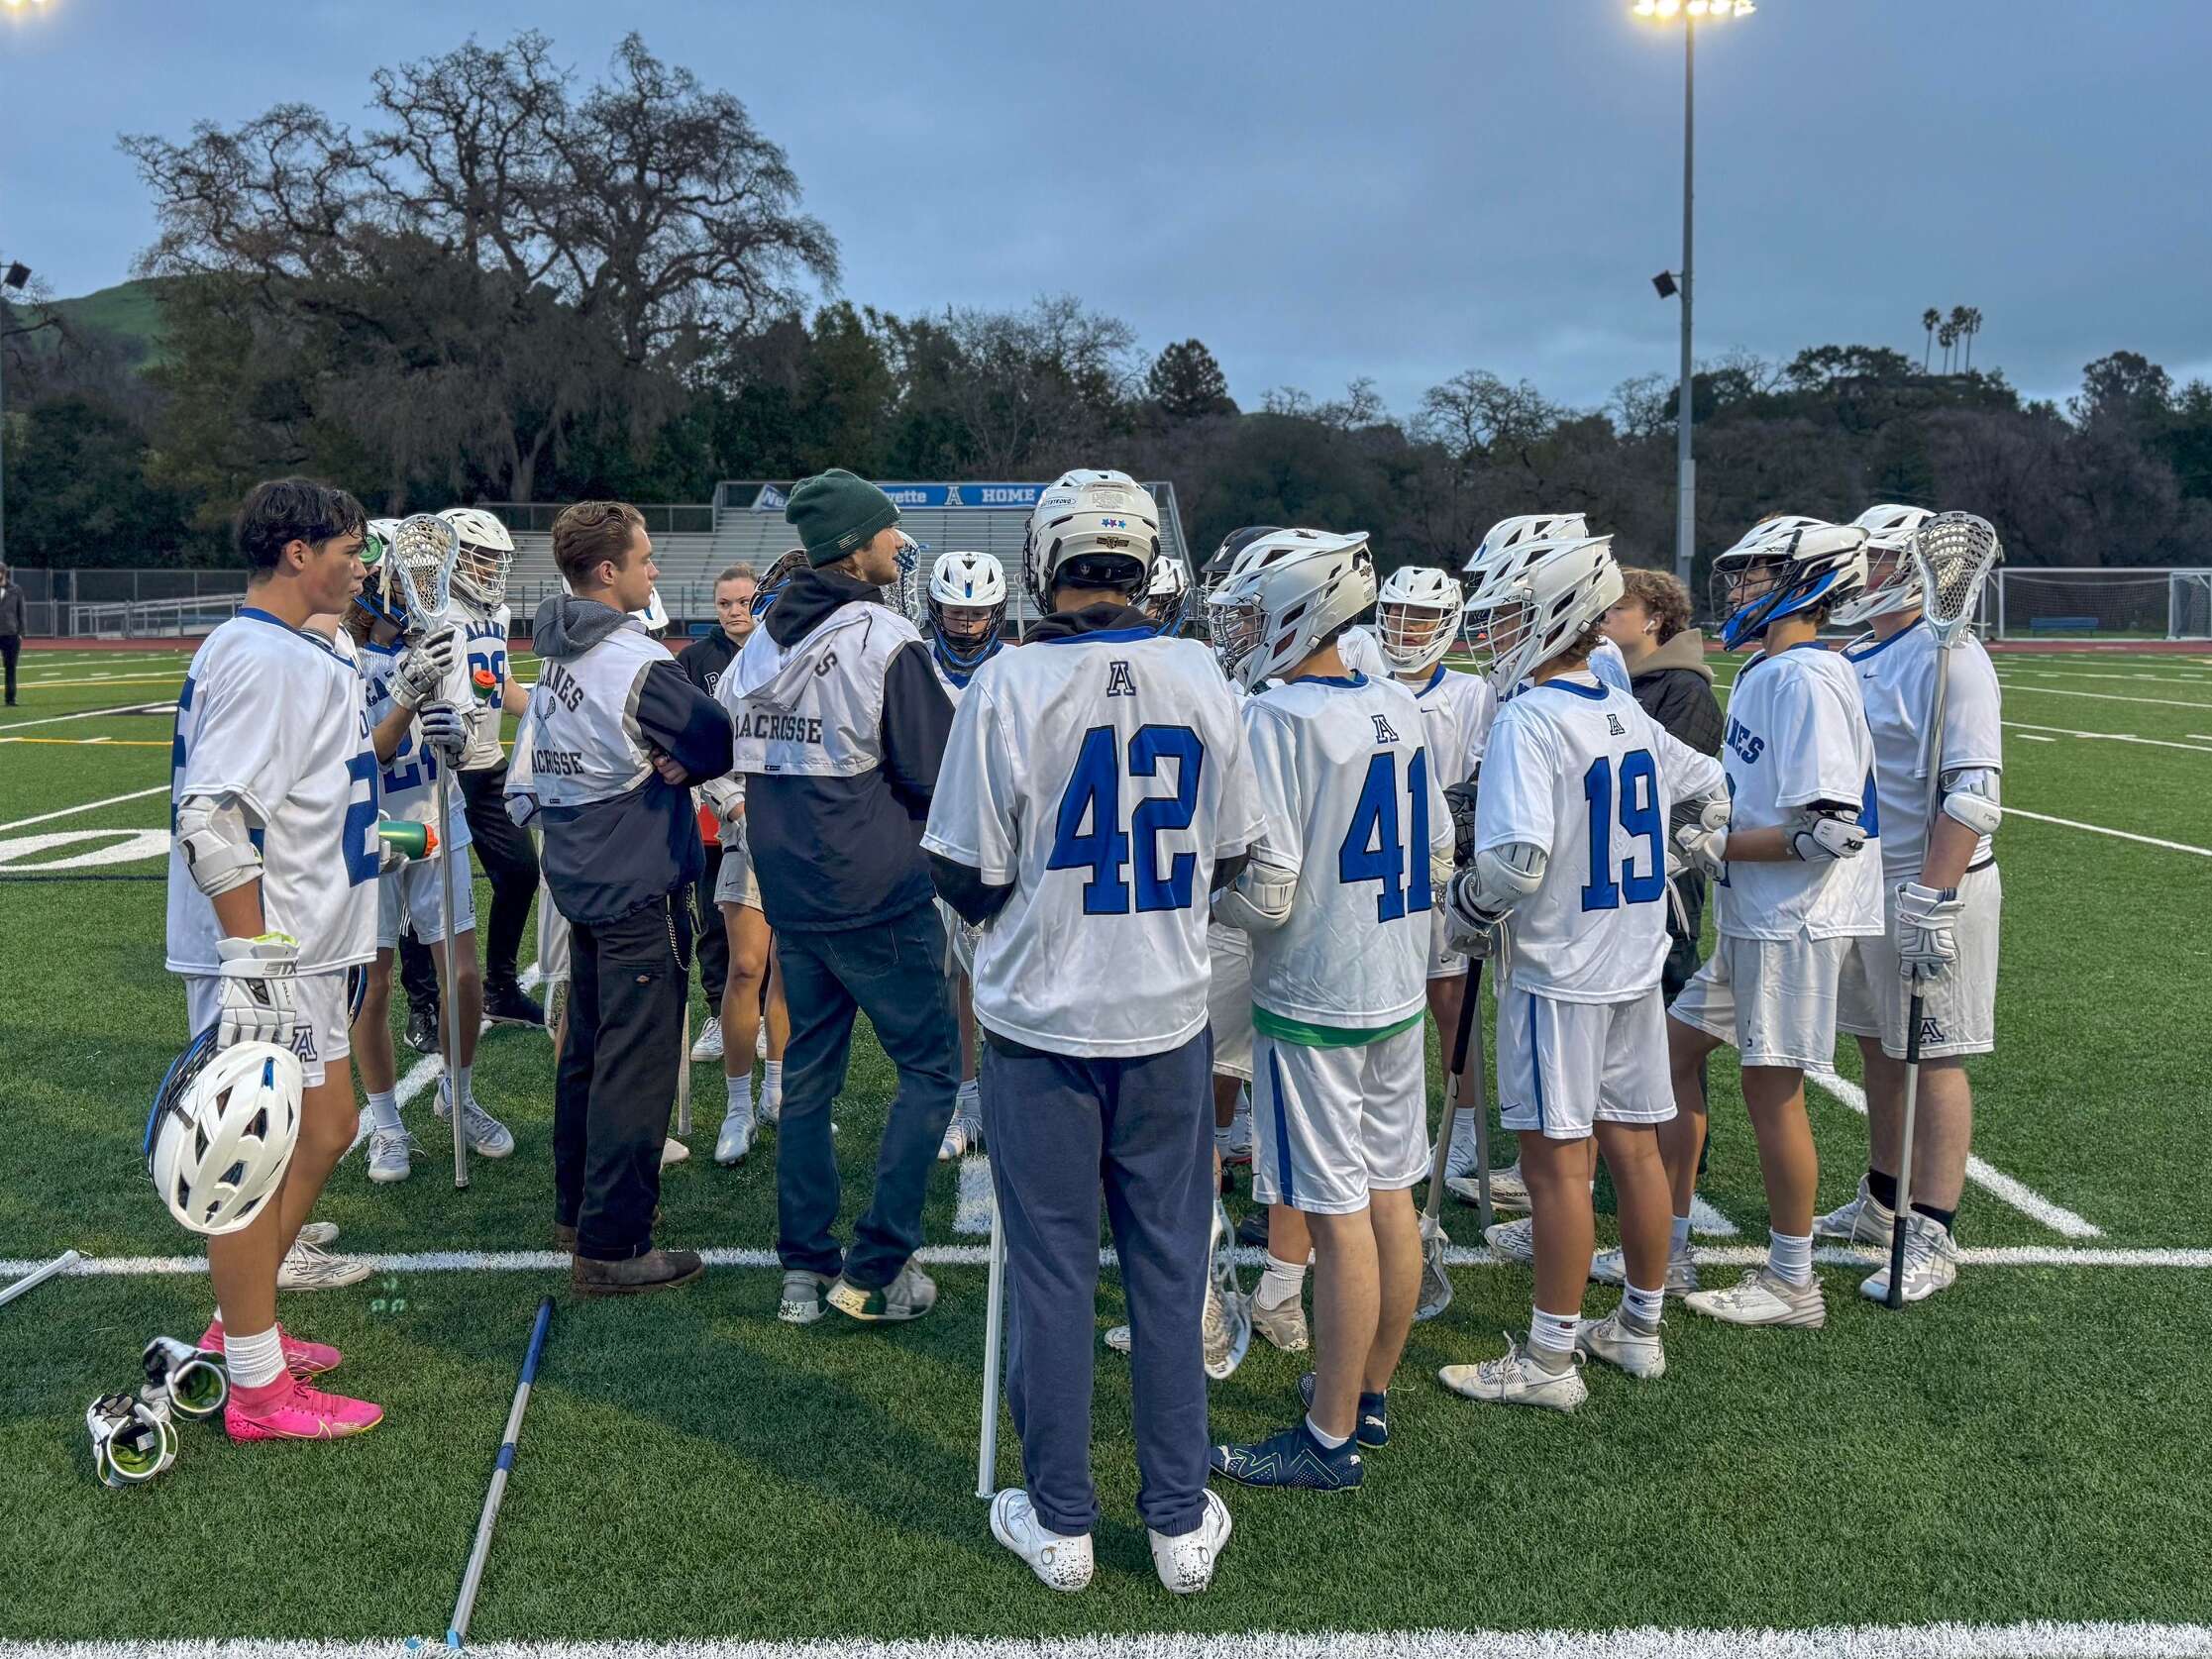 JV BOYS LACROSSE DOMINATES CALIFORNIA HS FOR FIRST WIN OF THE SEASON, 8-2